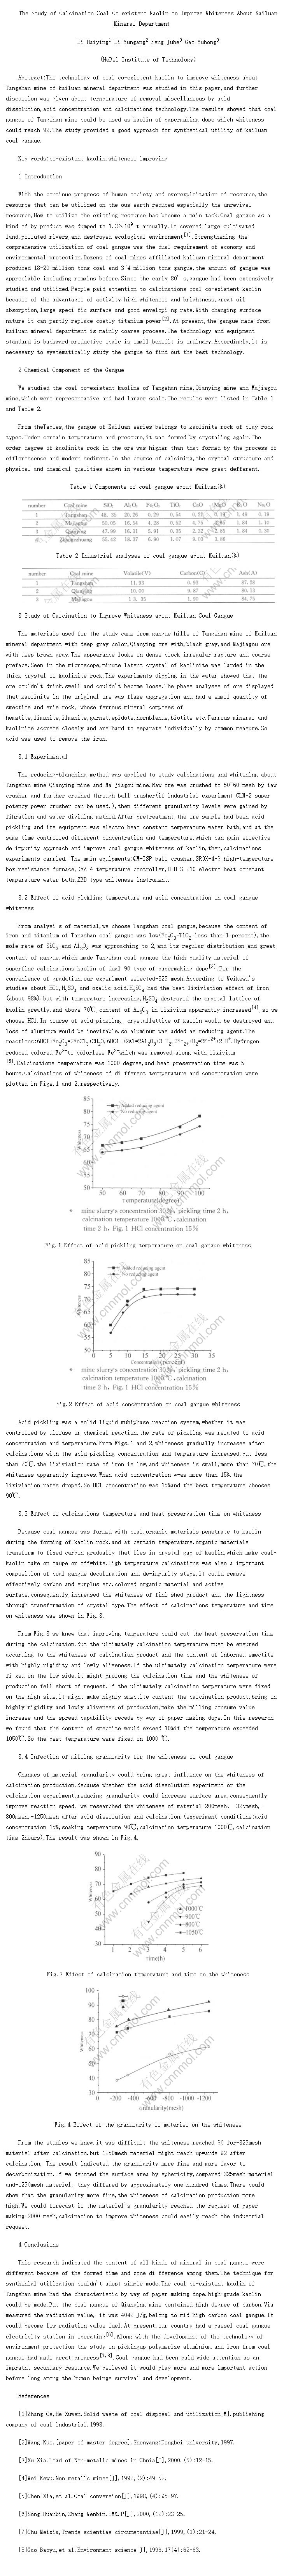 The Study of Calcination Coal Co-existent Kaolin to Improve Whiteness About Kailuan Mineral Department